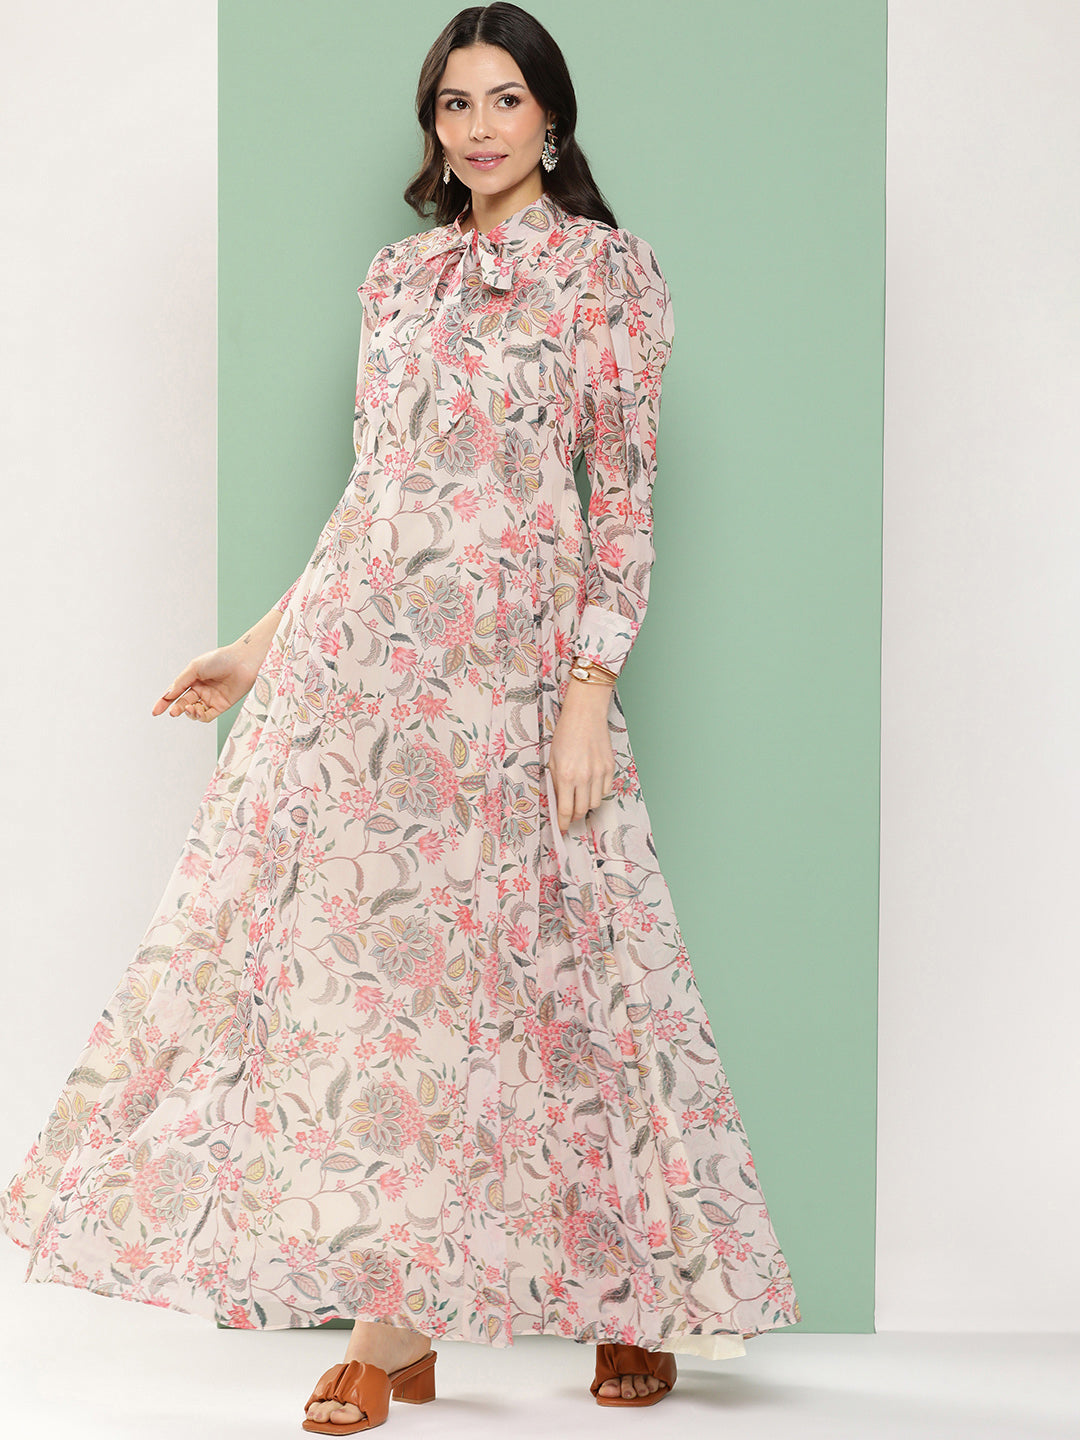 Women's Off-White Printed Long Dress With Tie-Up Neck - Bhama Couture